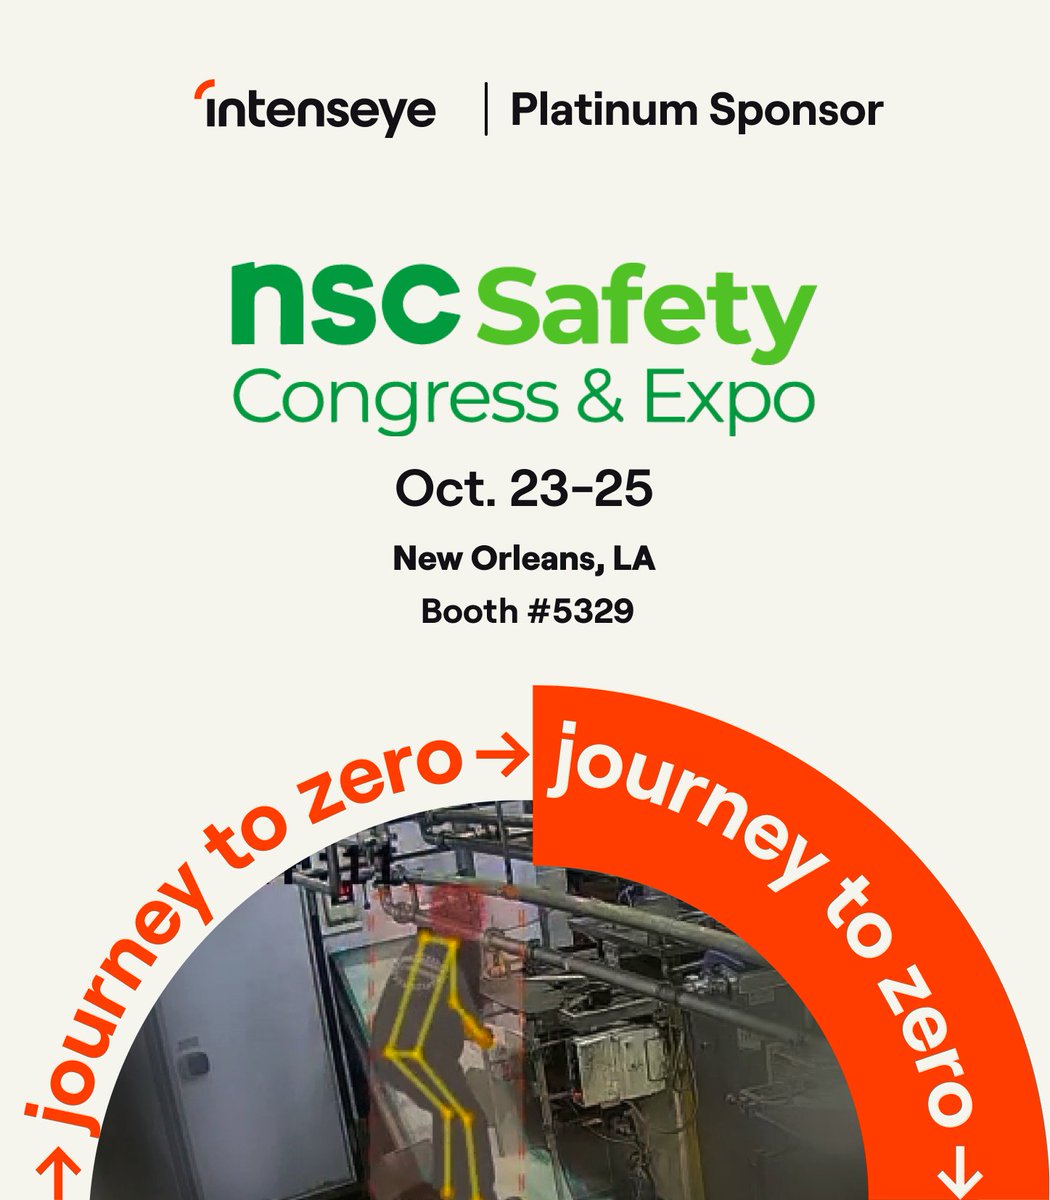 We'll be at this year’s @NSCsafety Congress & Expo in New Orleans and are proud to be a Platinum sponsor!

We hope to see you at booth 5329.

#intenseye #JourneytoZero #NSCExpo #WorkplaceSafety